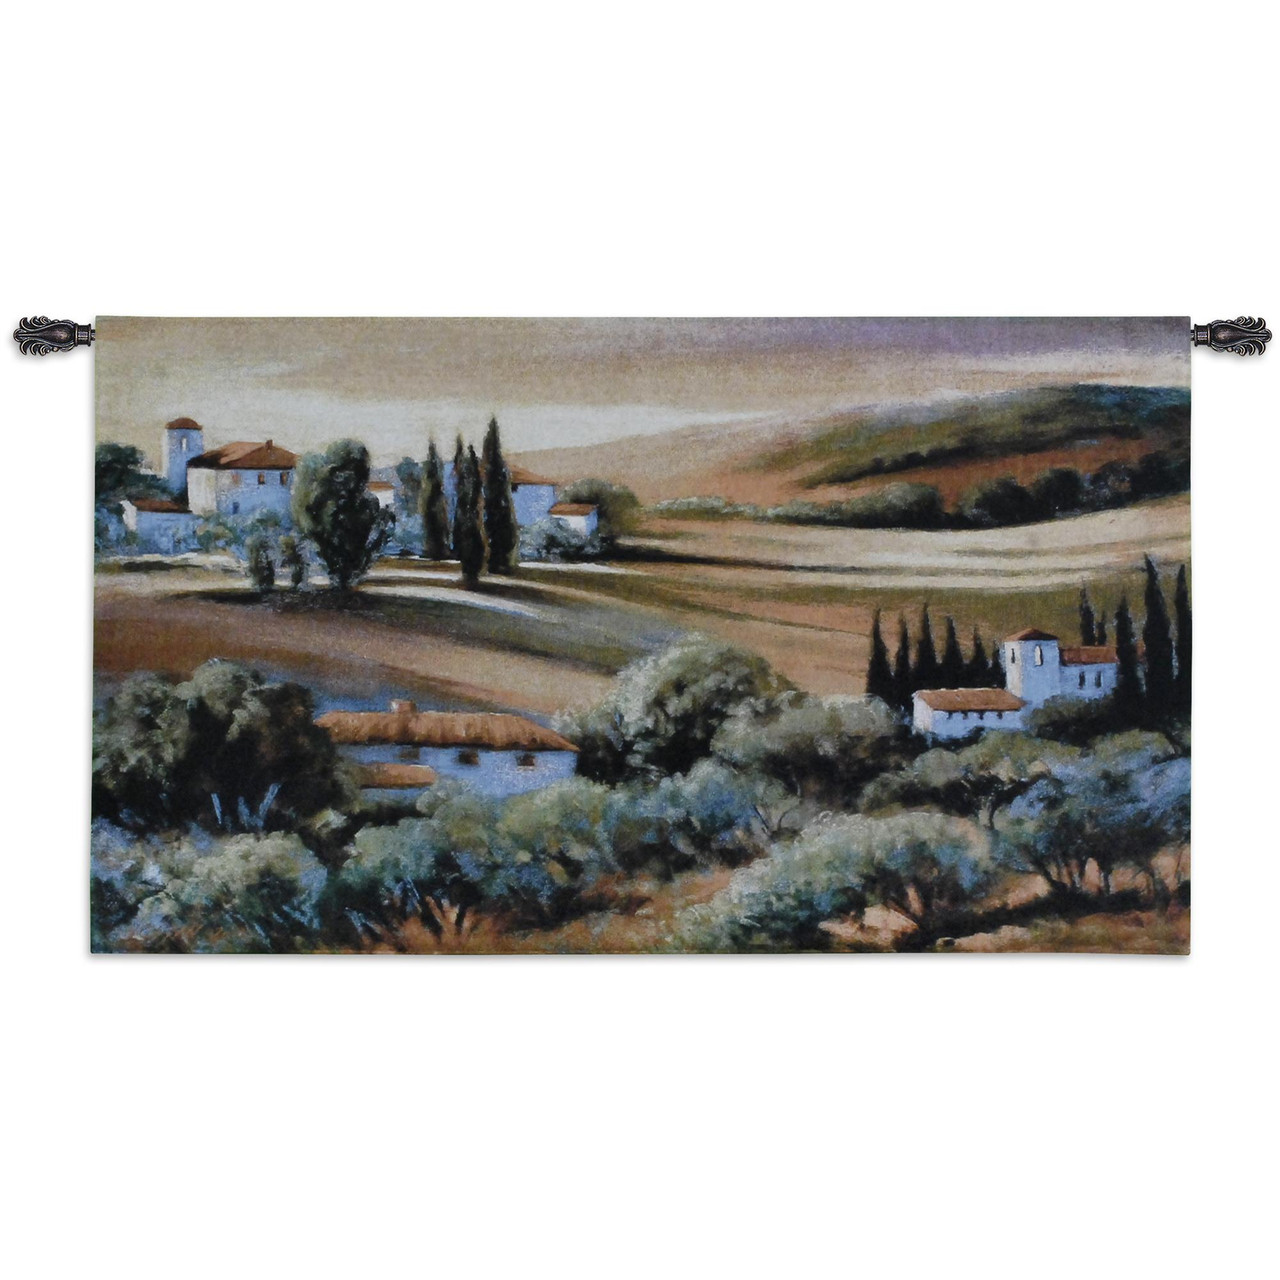 Afternoon Light in Tuscany by Carol Jessen Woven Tapestry Wall Art Hanging  Vibrant Tuscan Hillside Panoramic 100% Cotton USA Size 53x32